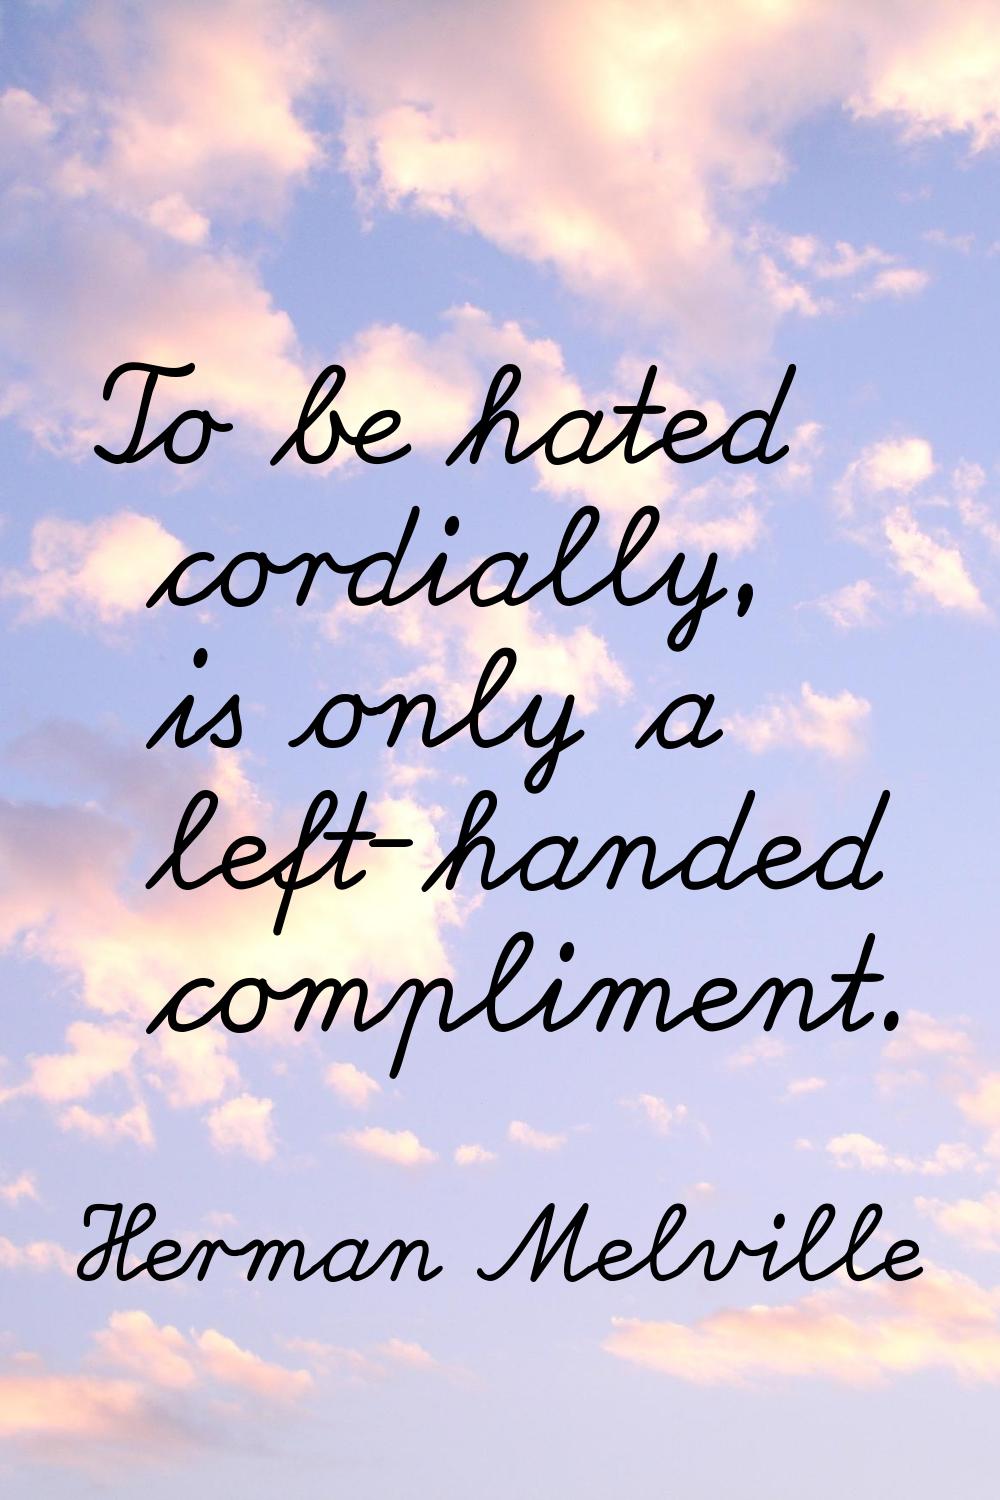 To be hated cordially, is only a left-handed compliment.